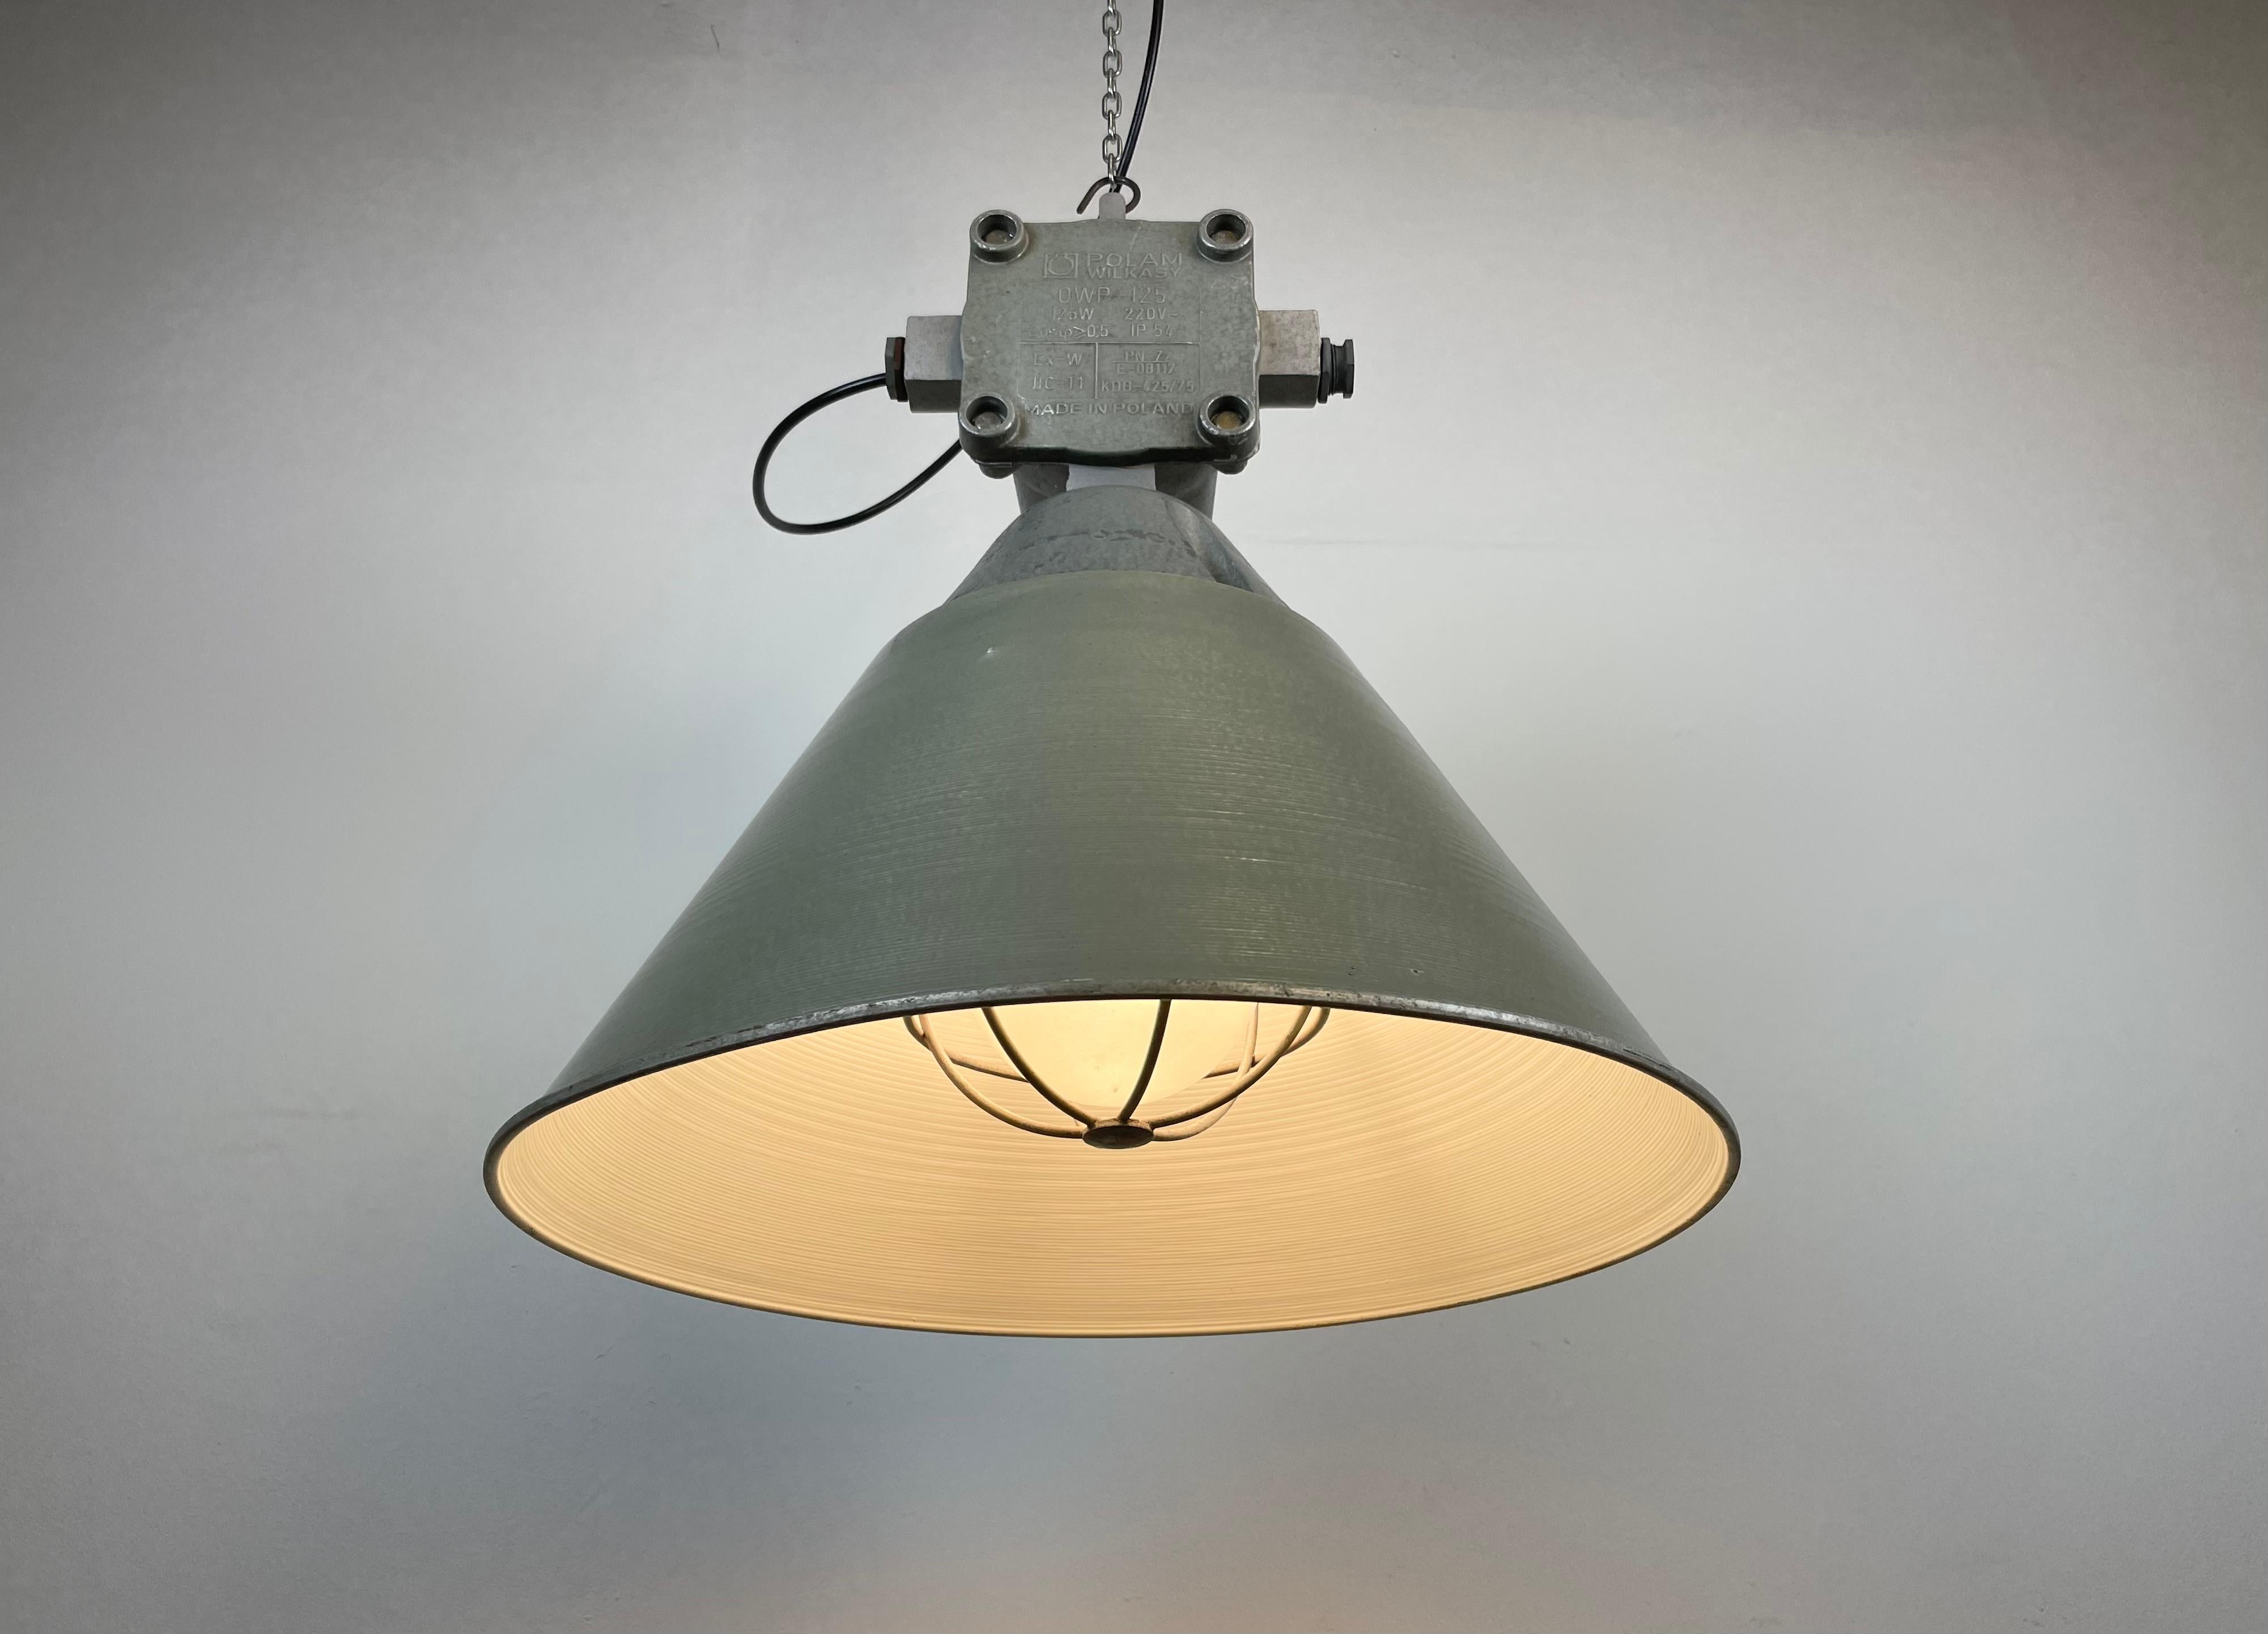 Industrial Explosion Proof Lamp with Aluminium Shade from Polam, 1970s For Sale 8